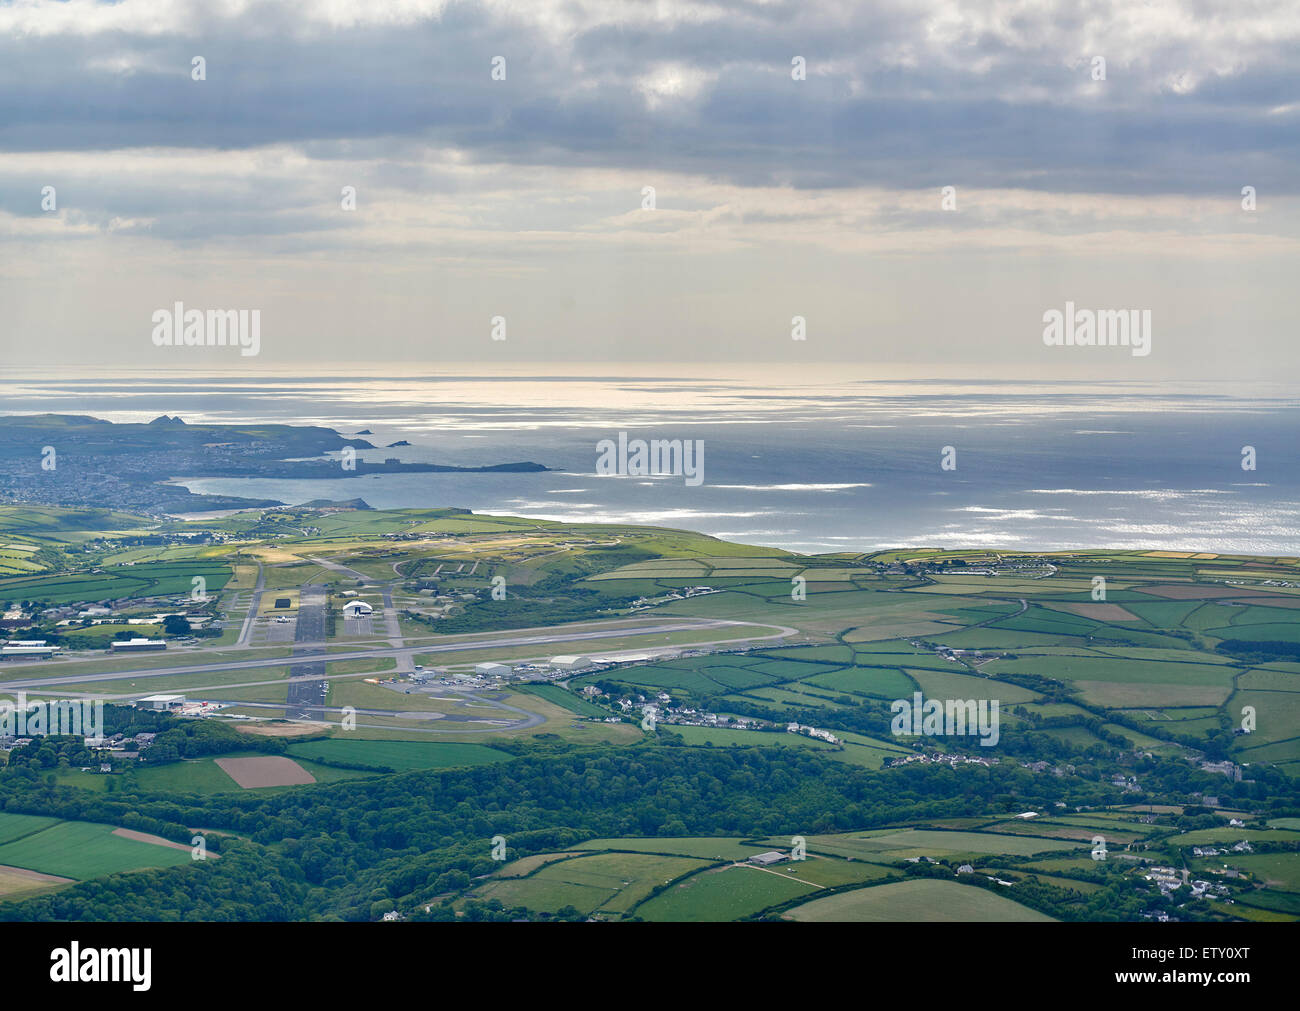 Newquay airport, South West England, shot from the air Stock Photo